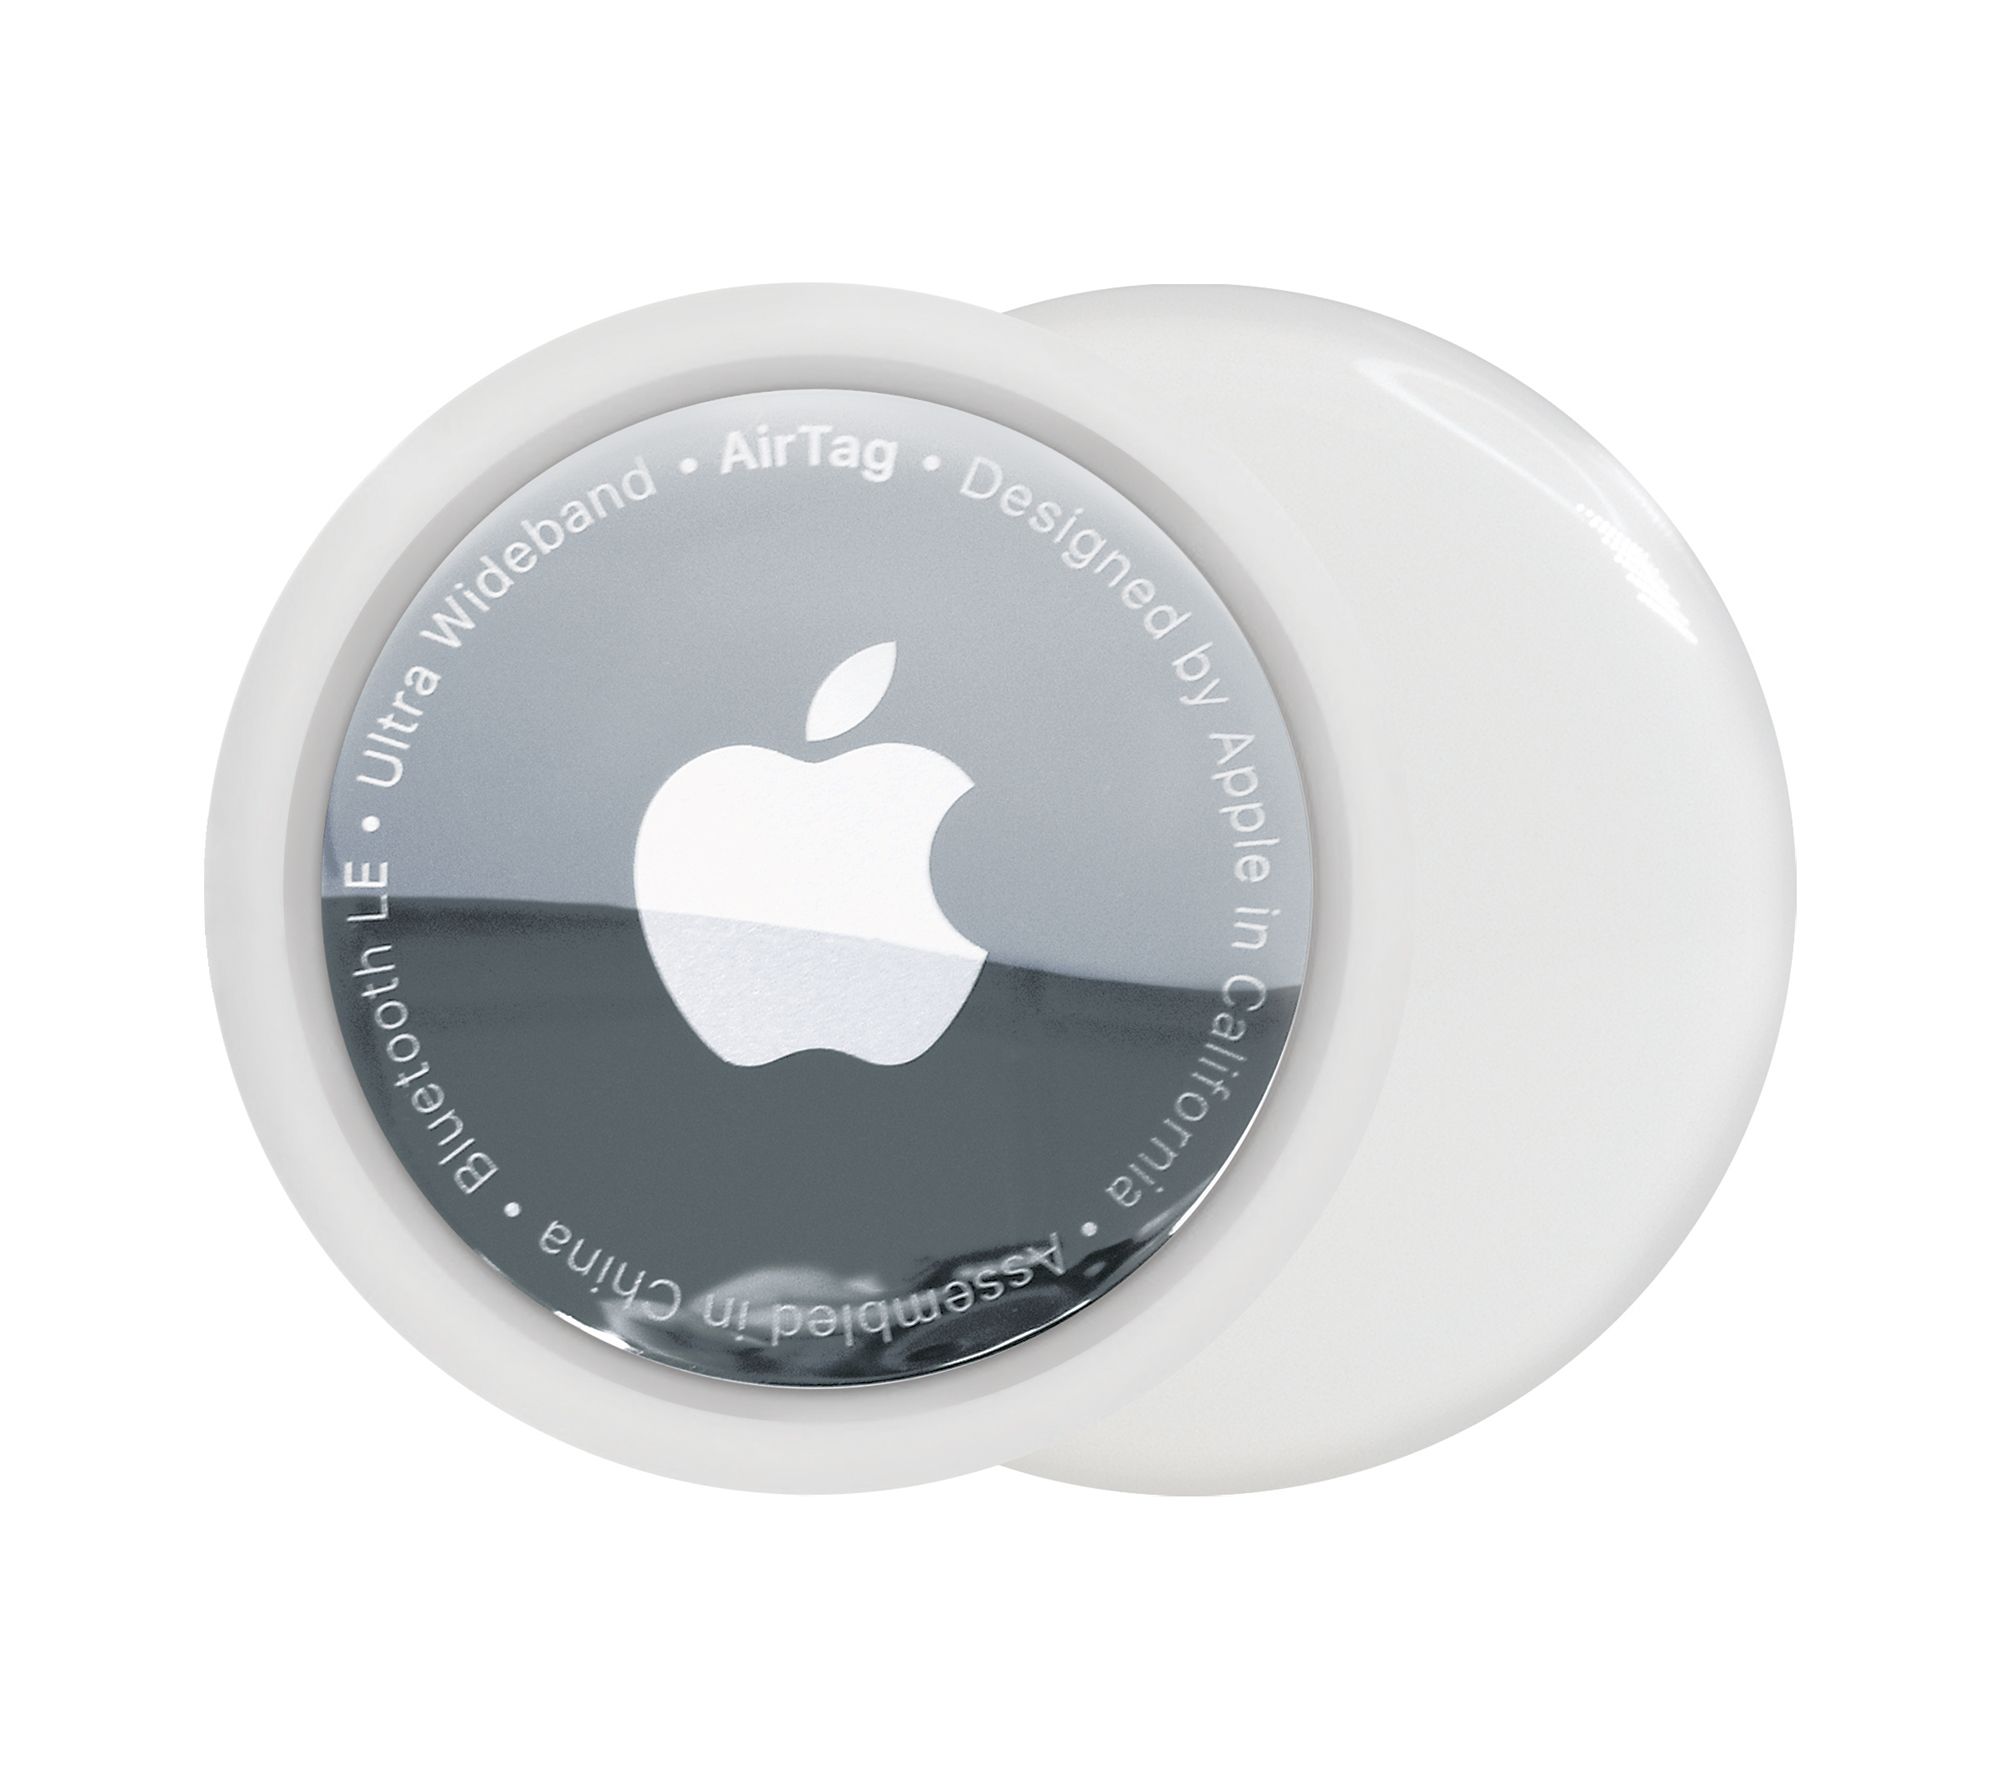 Apple AirTag Single Tracker with Keychain Case & Voucher - QVC.com